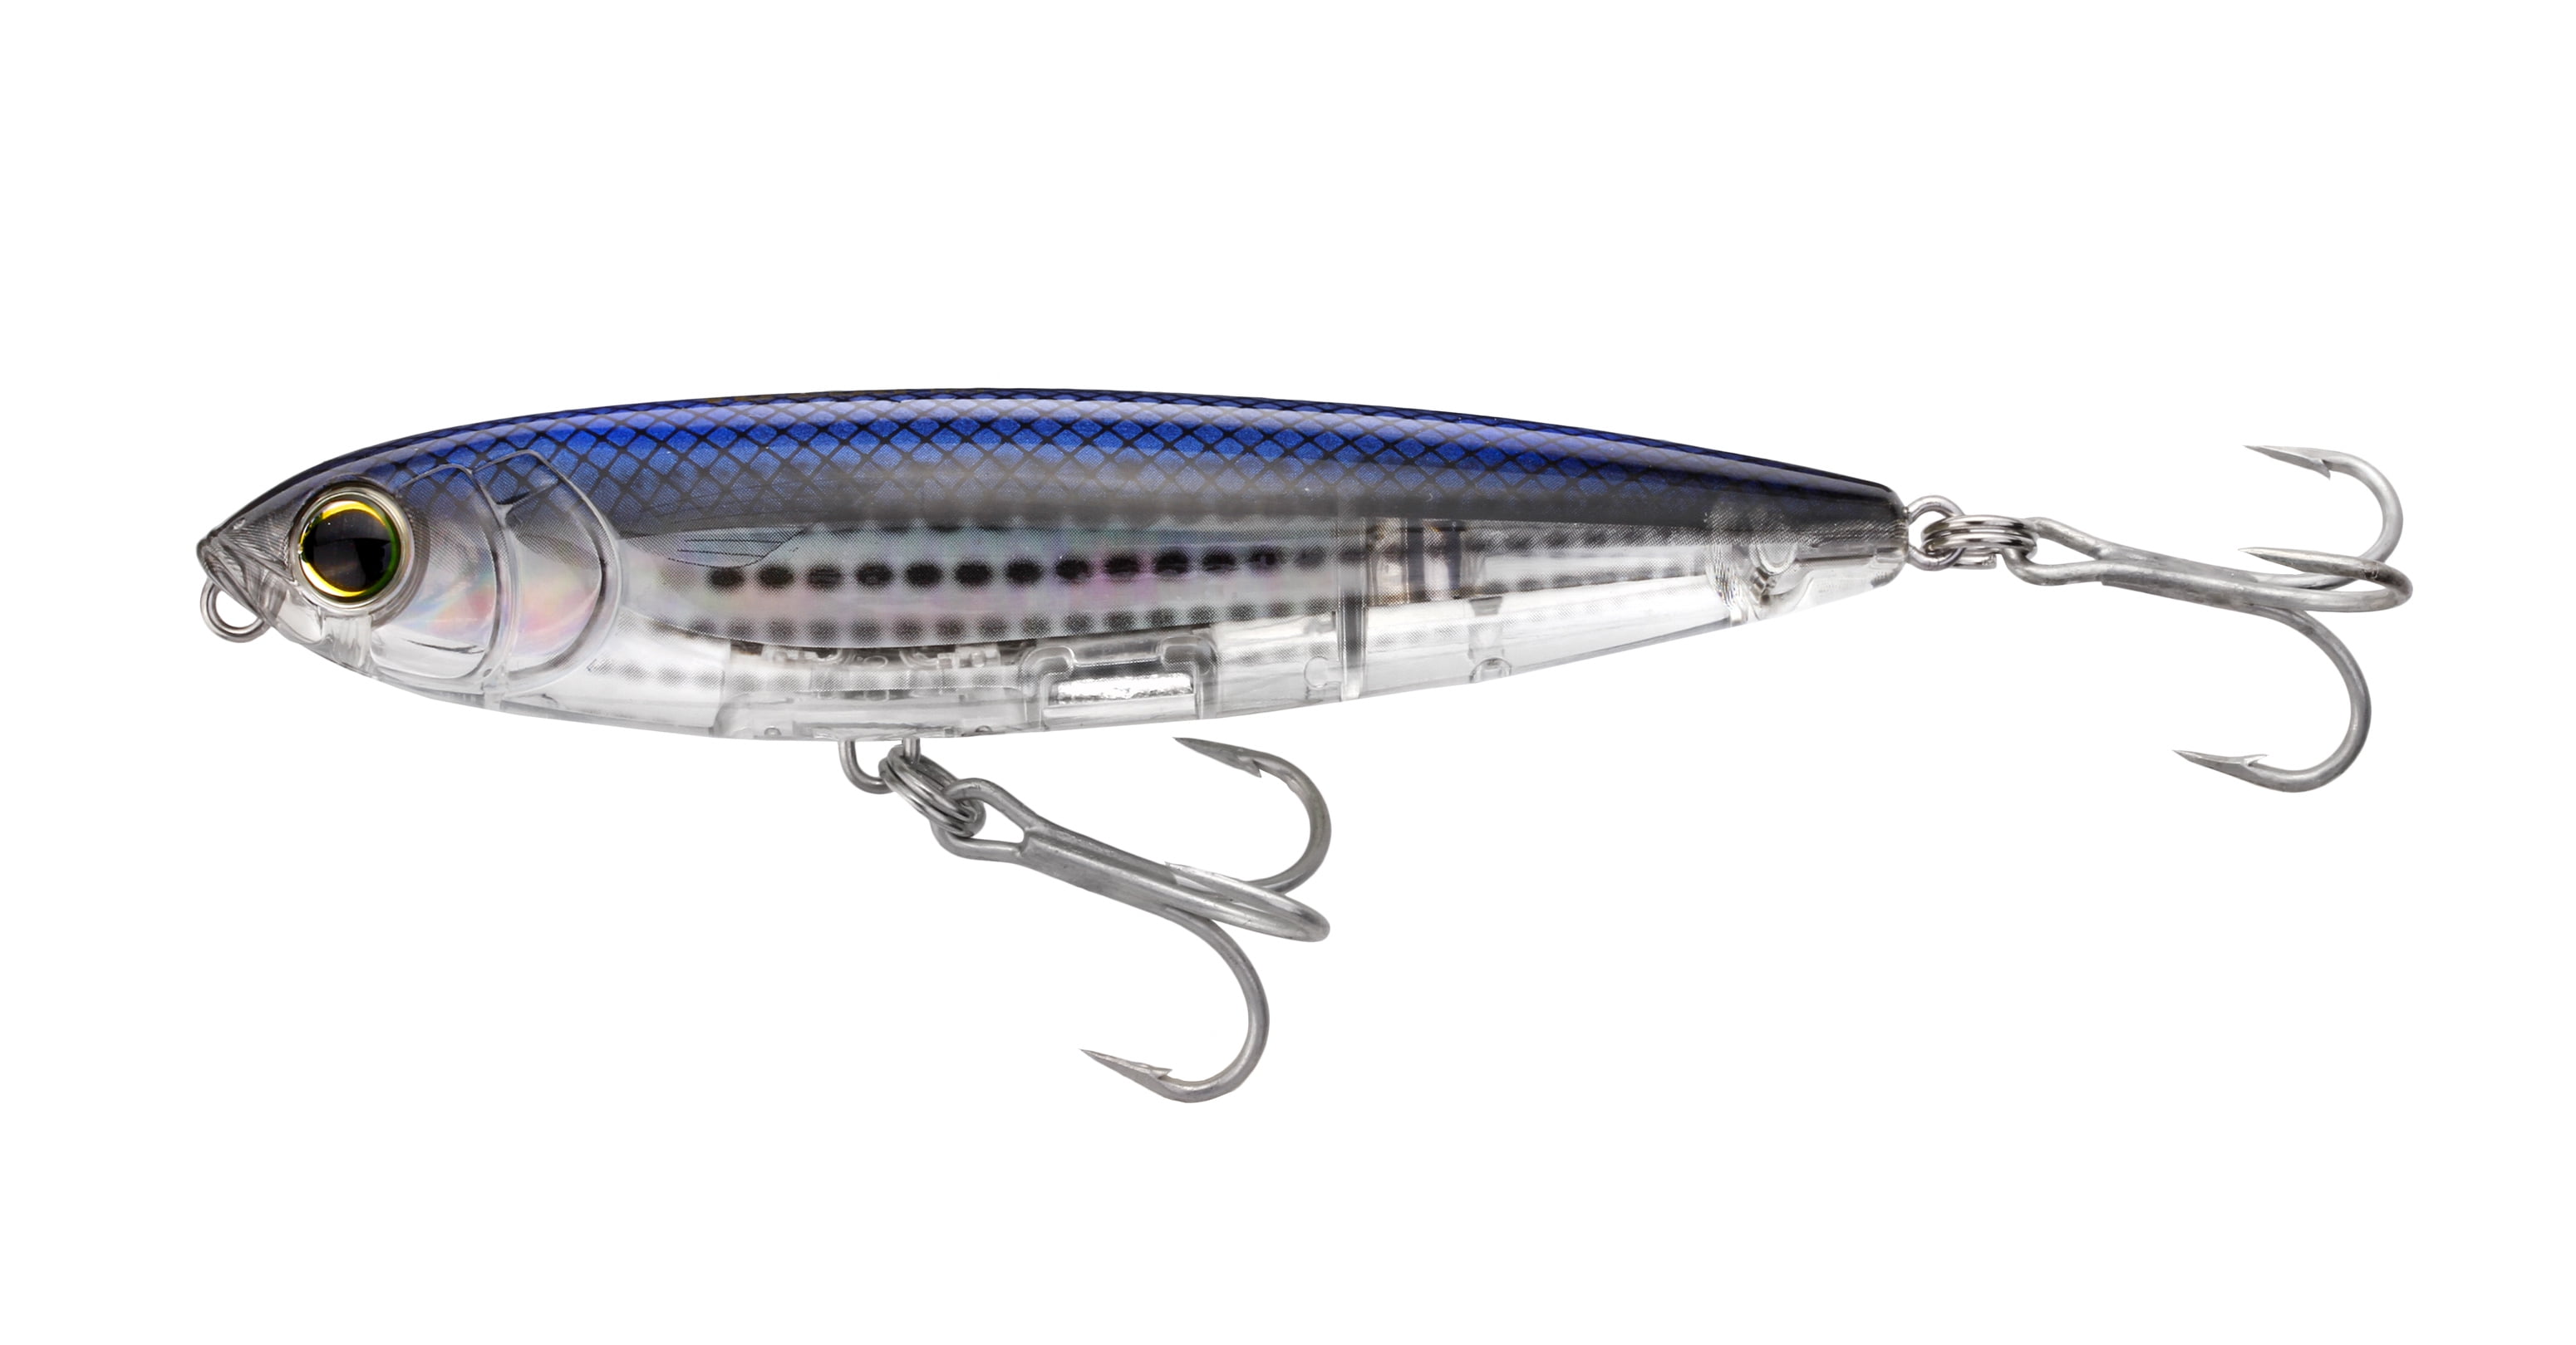 Details about   FISHING LURE IMA POPKEY 120 16g SALT WATER PENCIL BAIT top water owner hooks